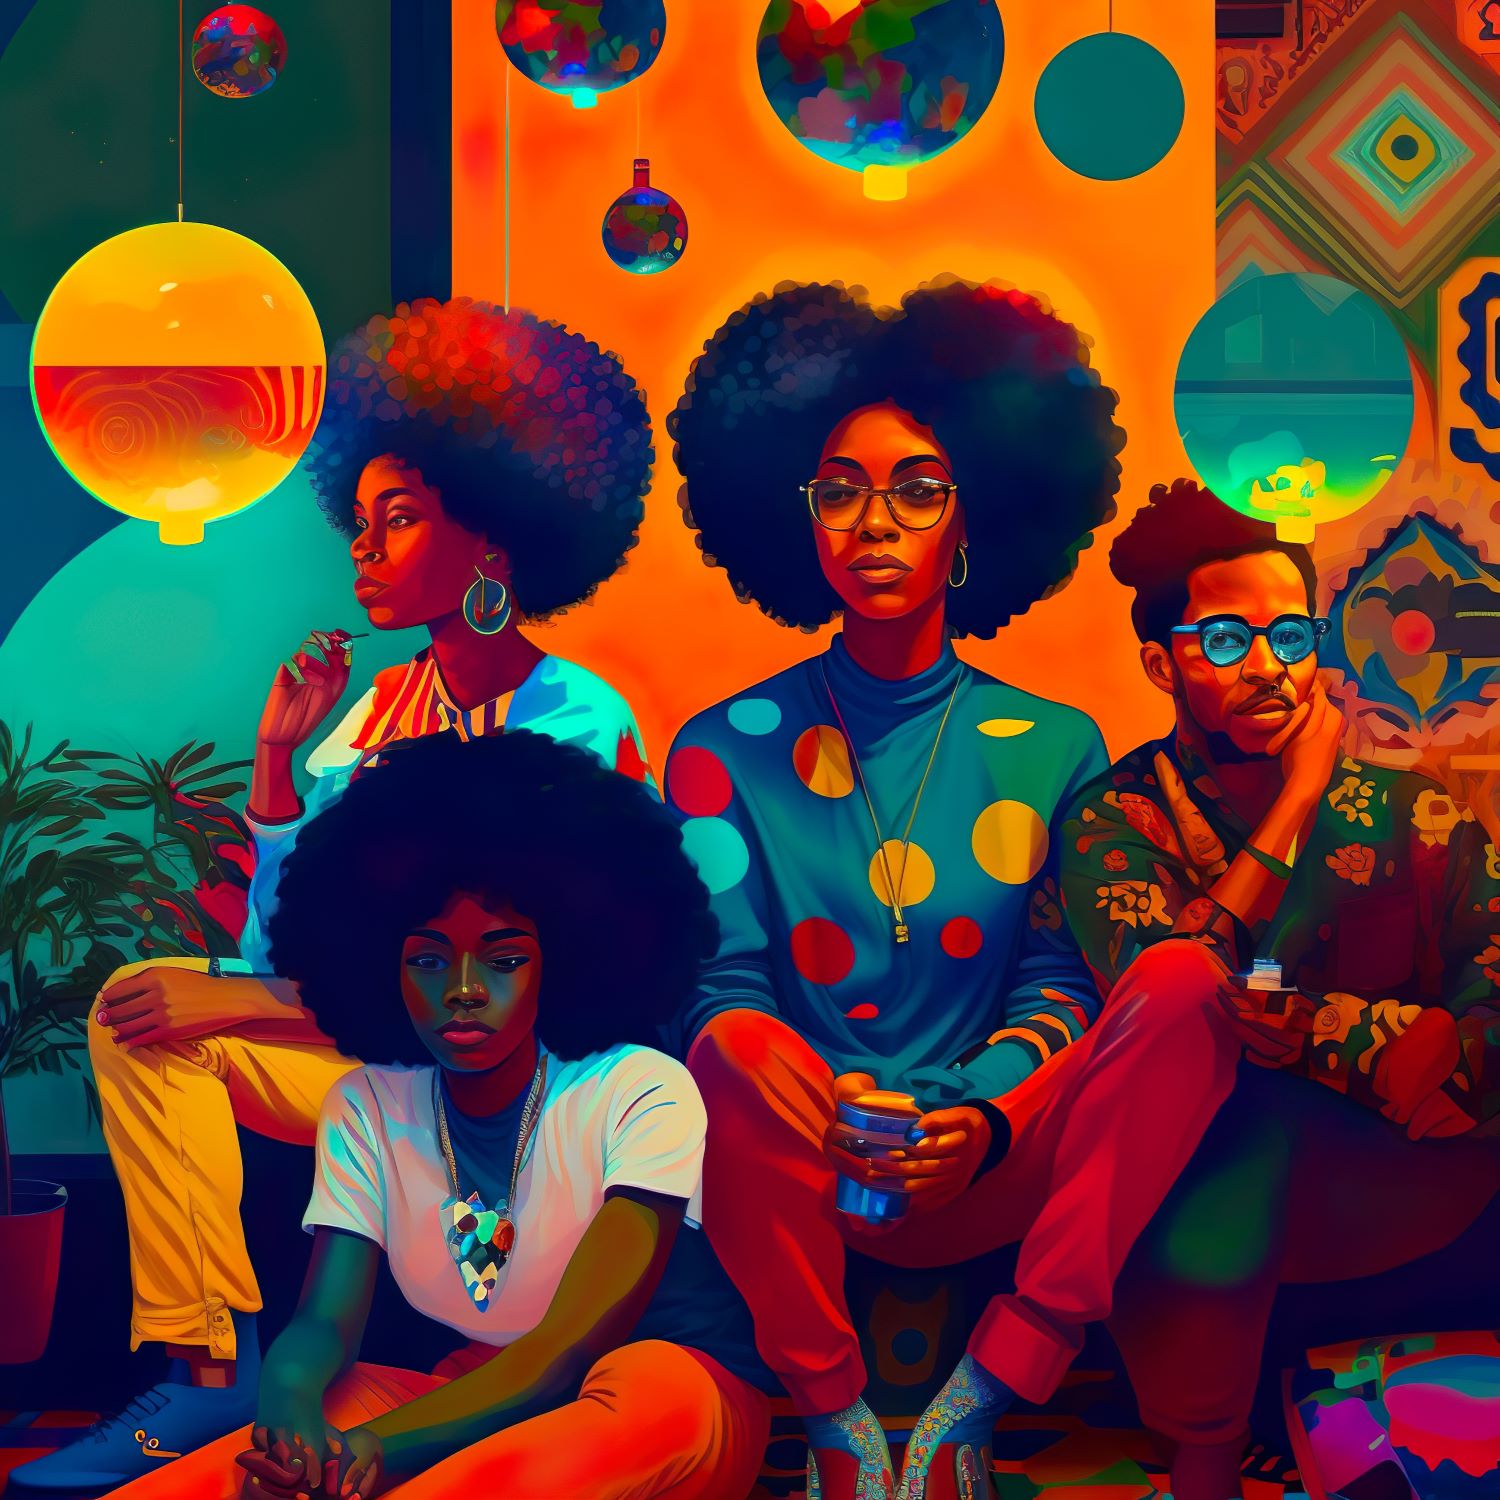 Three Black women and one Black man sitting in a group dressed in colorful clothes looking in difference directions with colorful circular shapes around them.